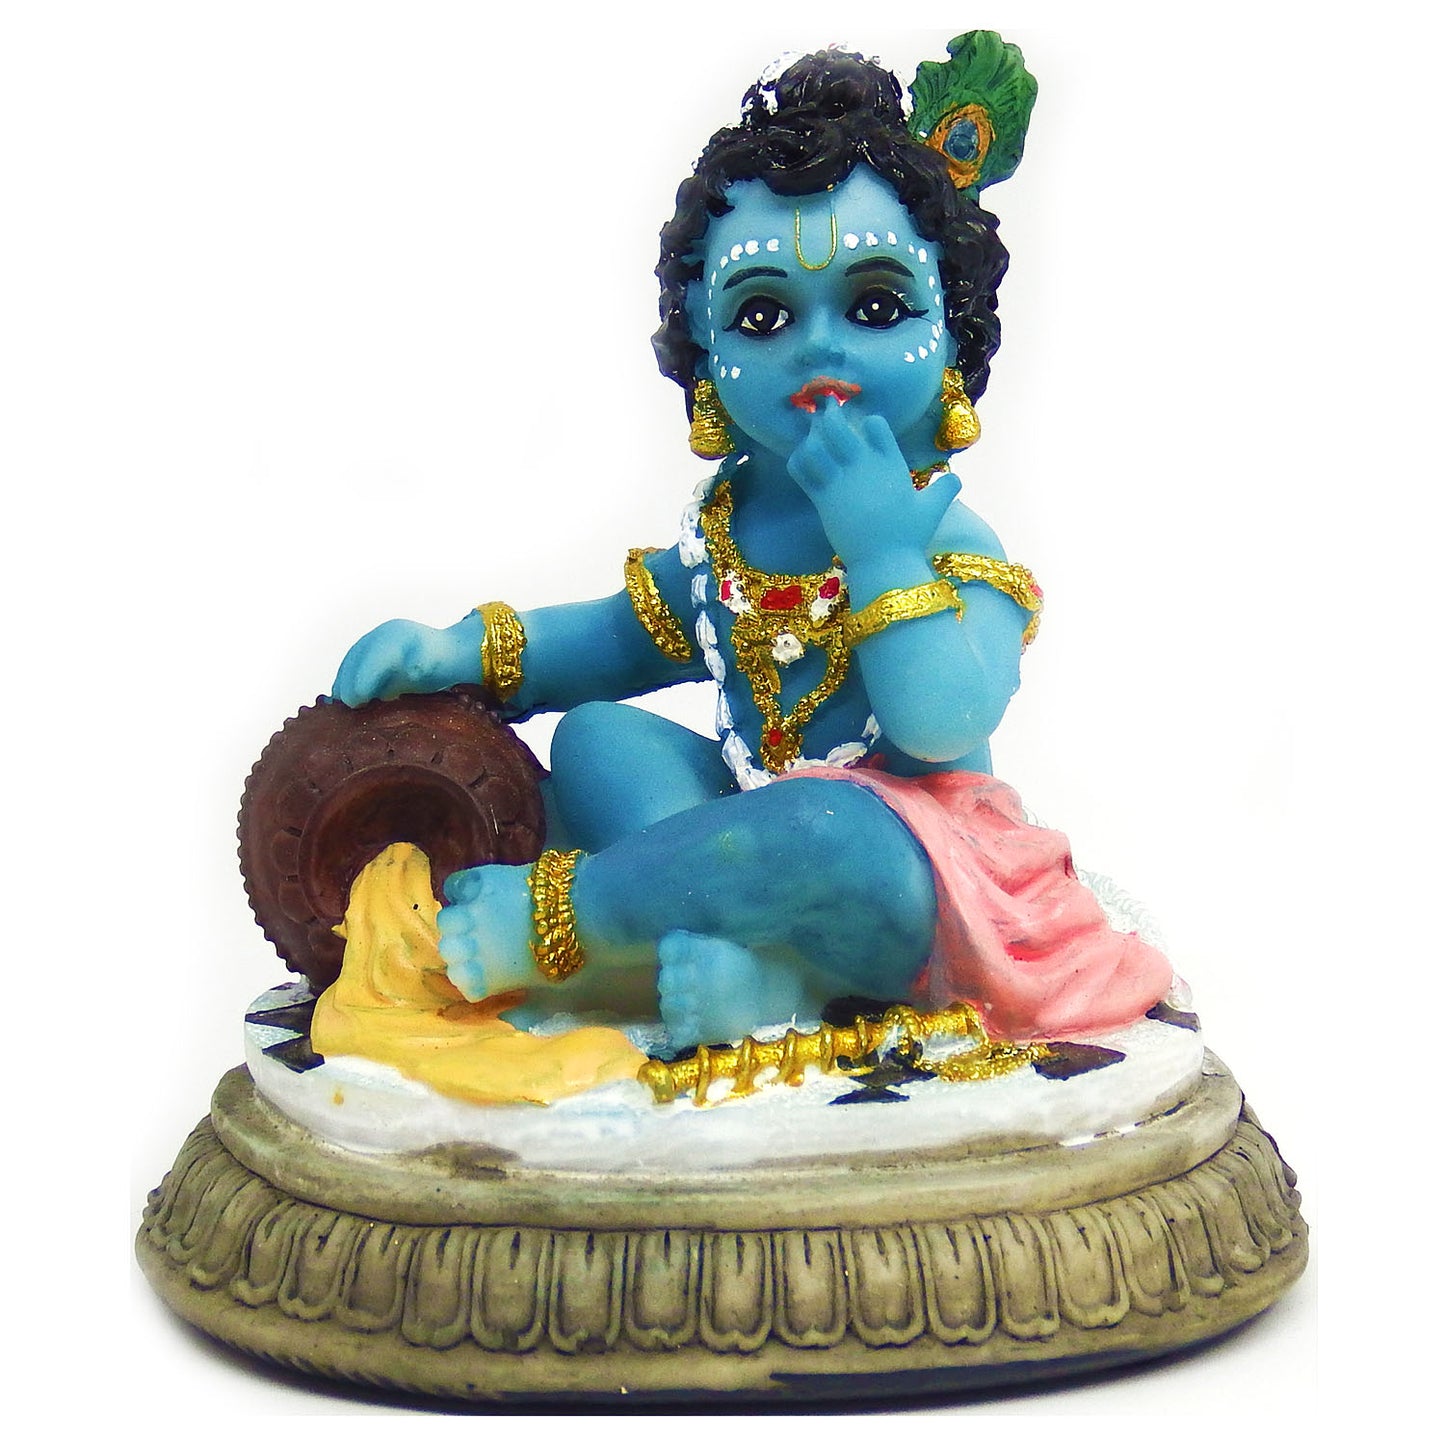 Statue of Baby Krishna Eating Butter